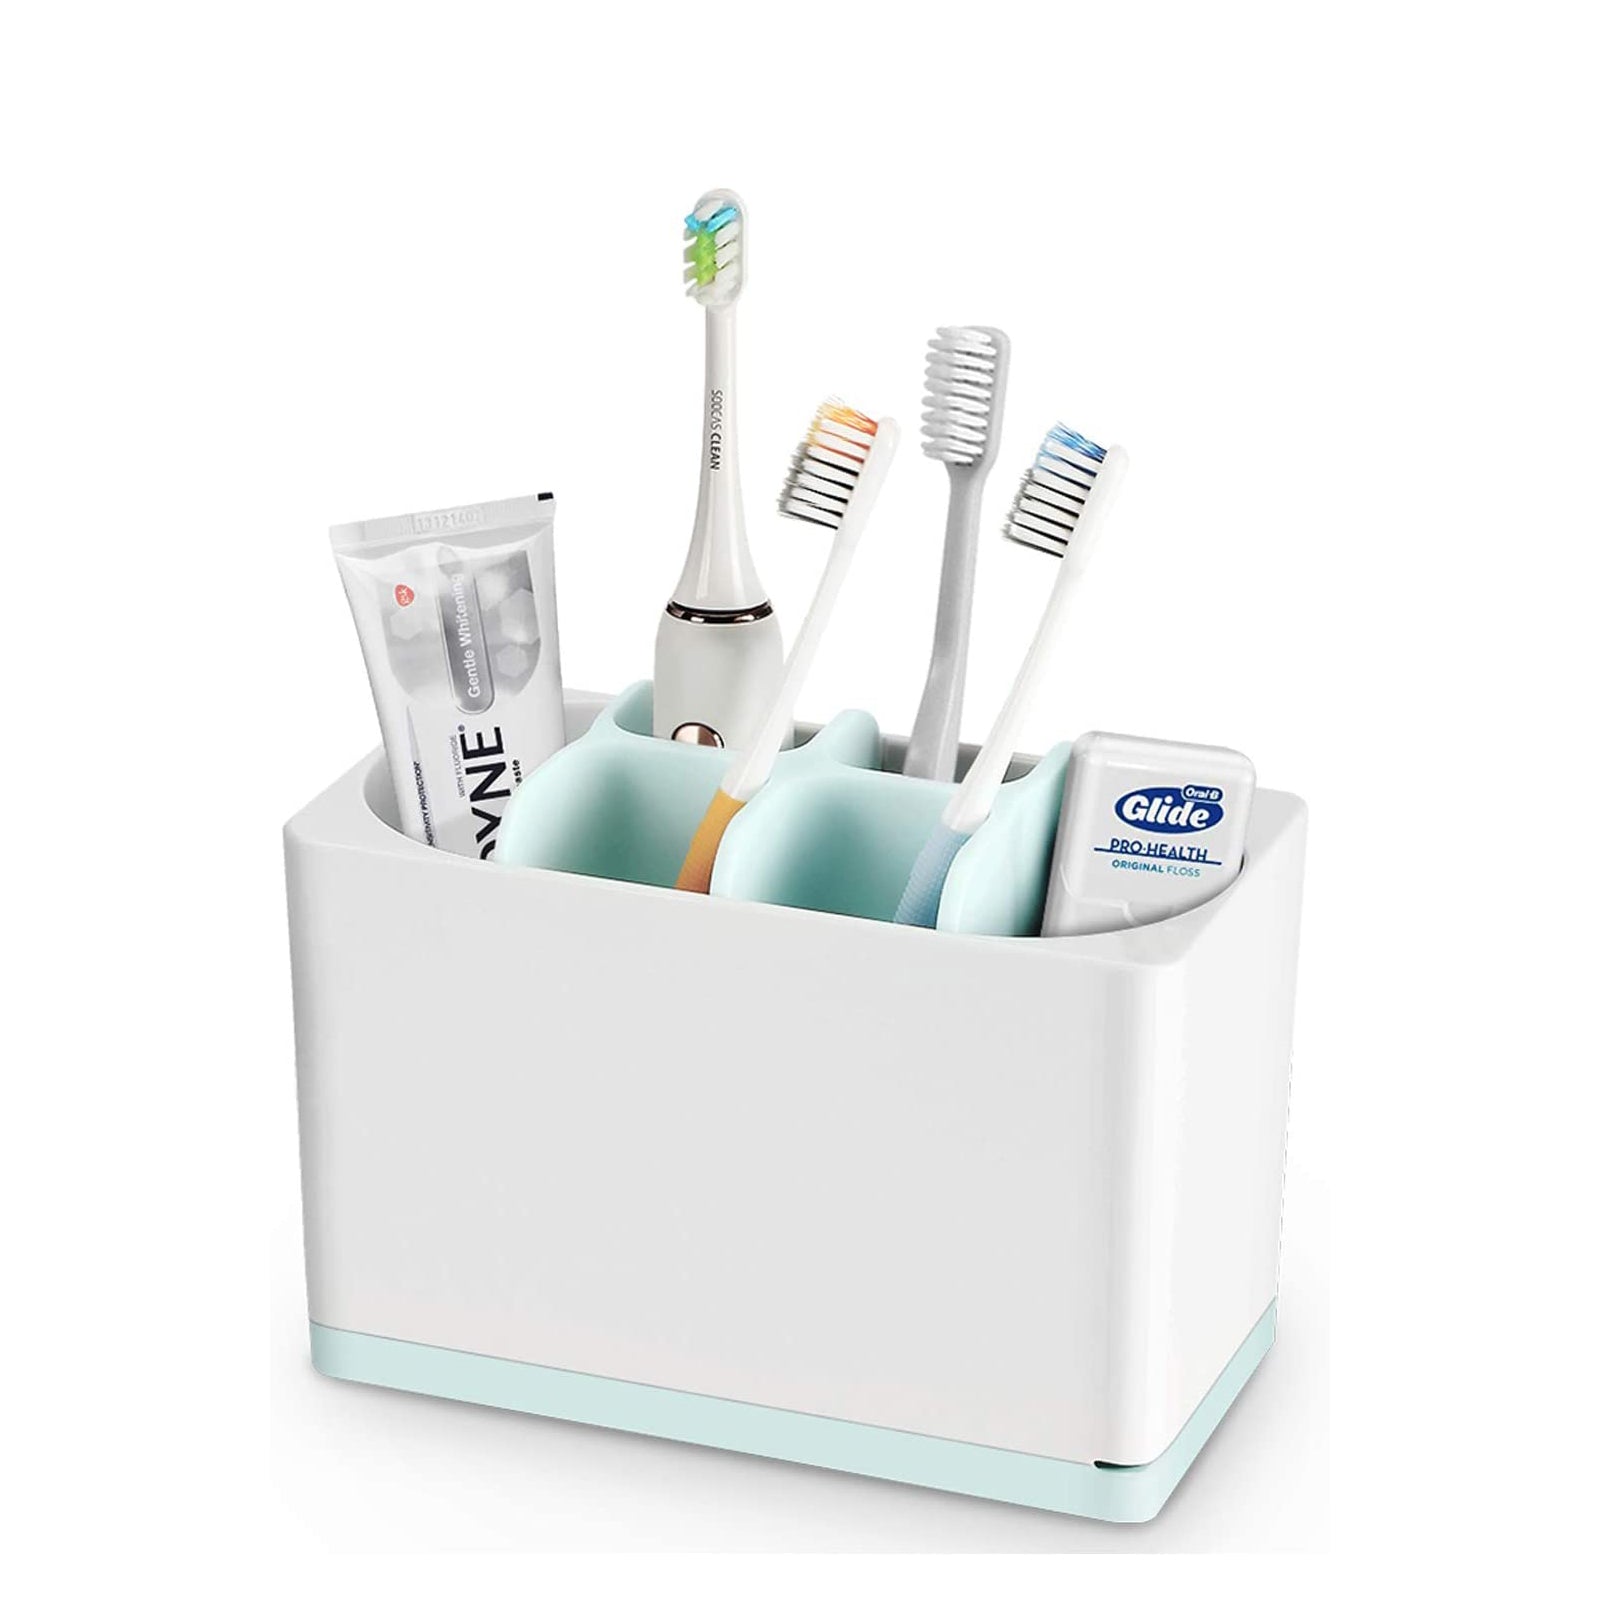 Gray - Toothbrush Holder, Toothbrush Holder, Removable Plastic Cup With  Drainage Hole, 2 Toothbrush Compartments + 1 Storage Tray, Non-slip Bottom.